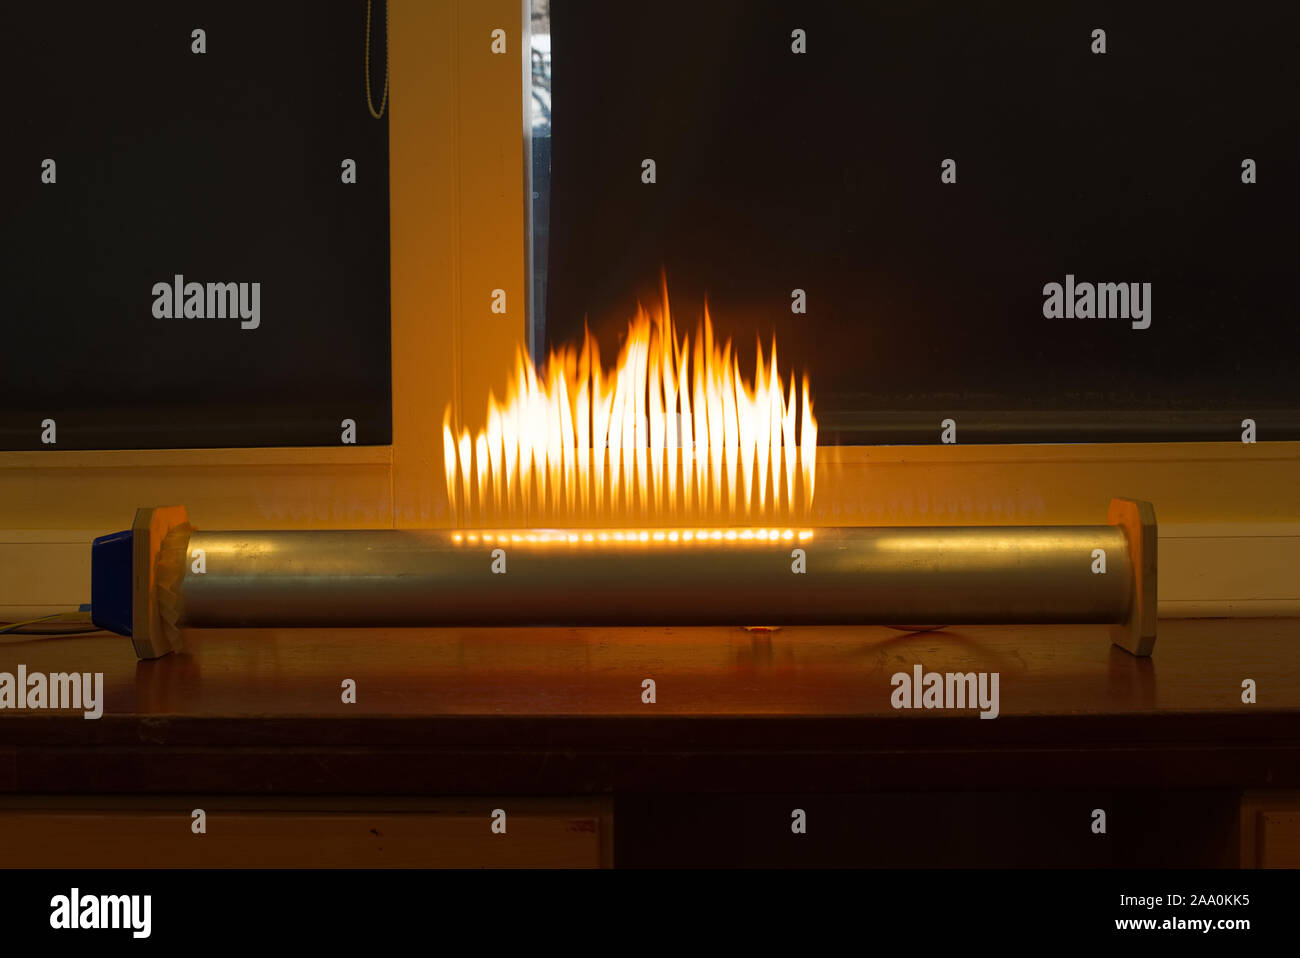 Rubens standing wave flame tube with flames showing resonance in a school science lab. Scientific education concept. Stock Photo